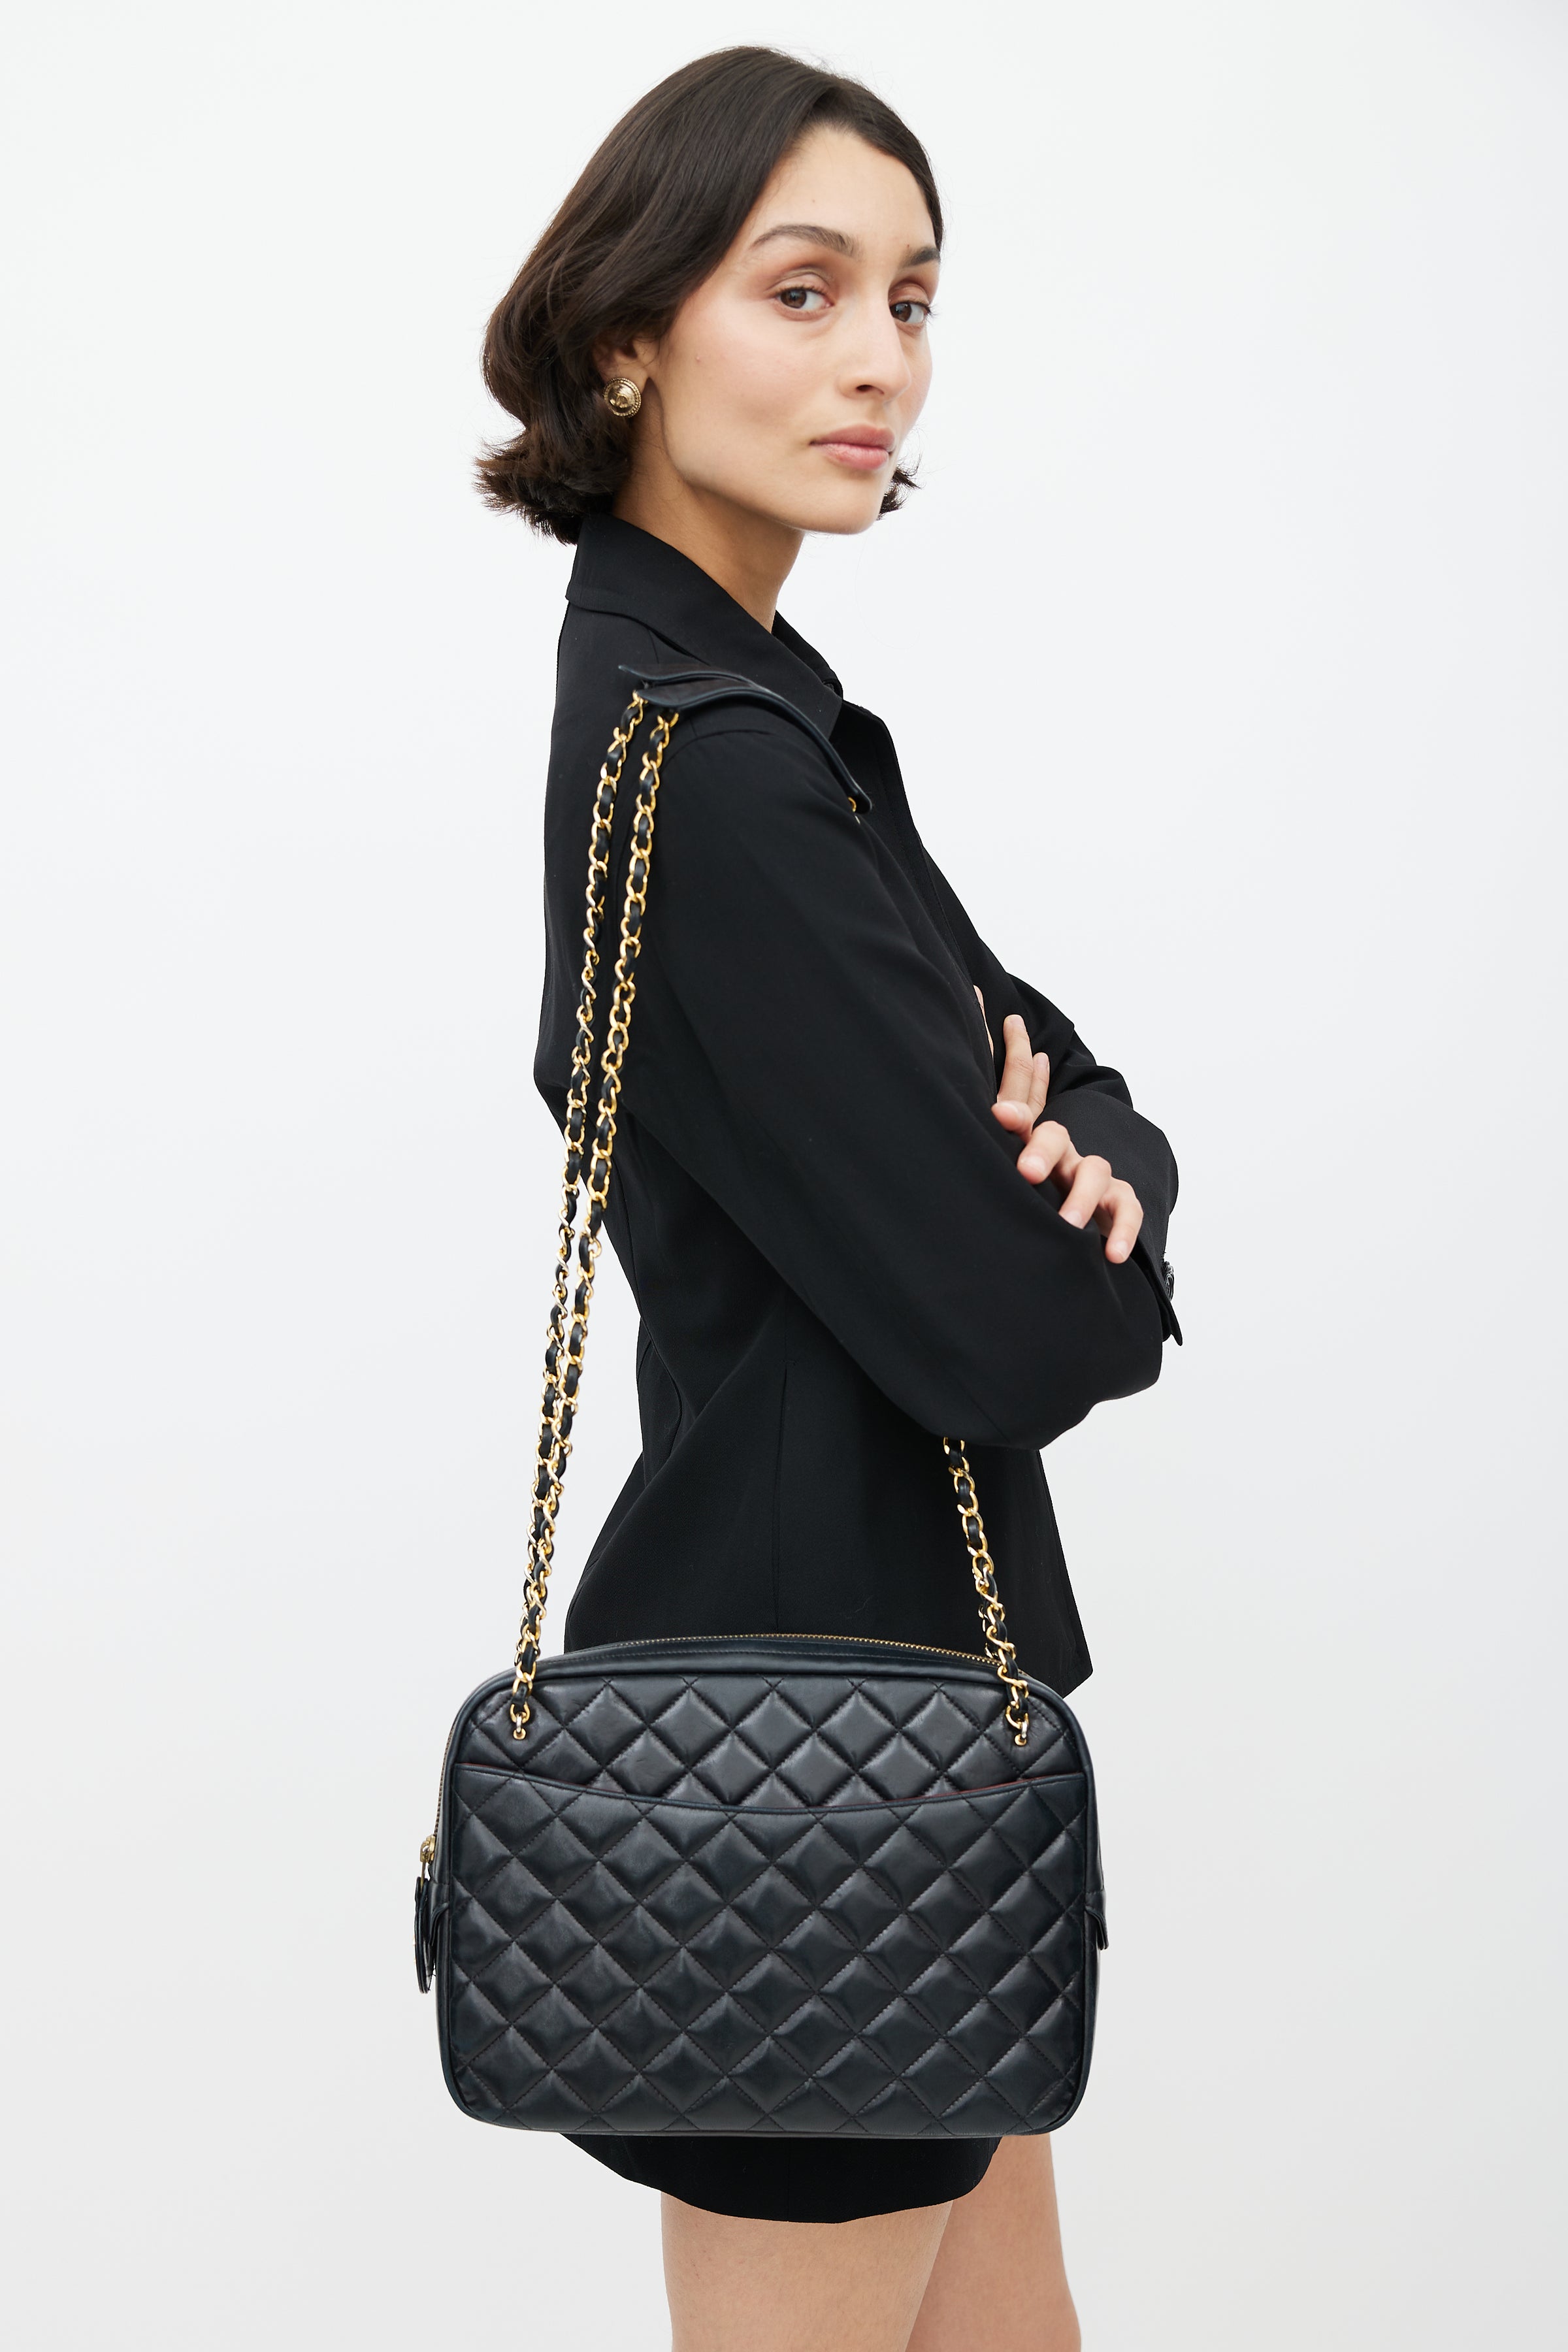 CHANEL Caviar Quilted Camera Bag Black 1204181